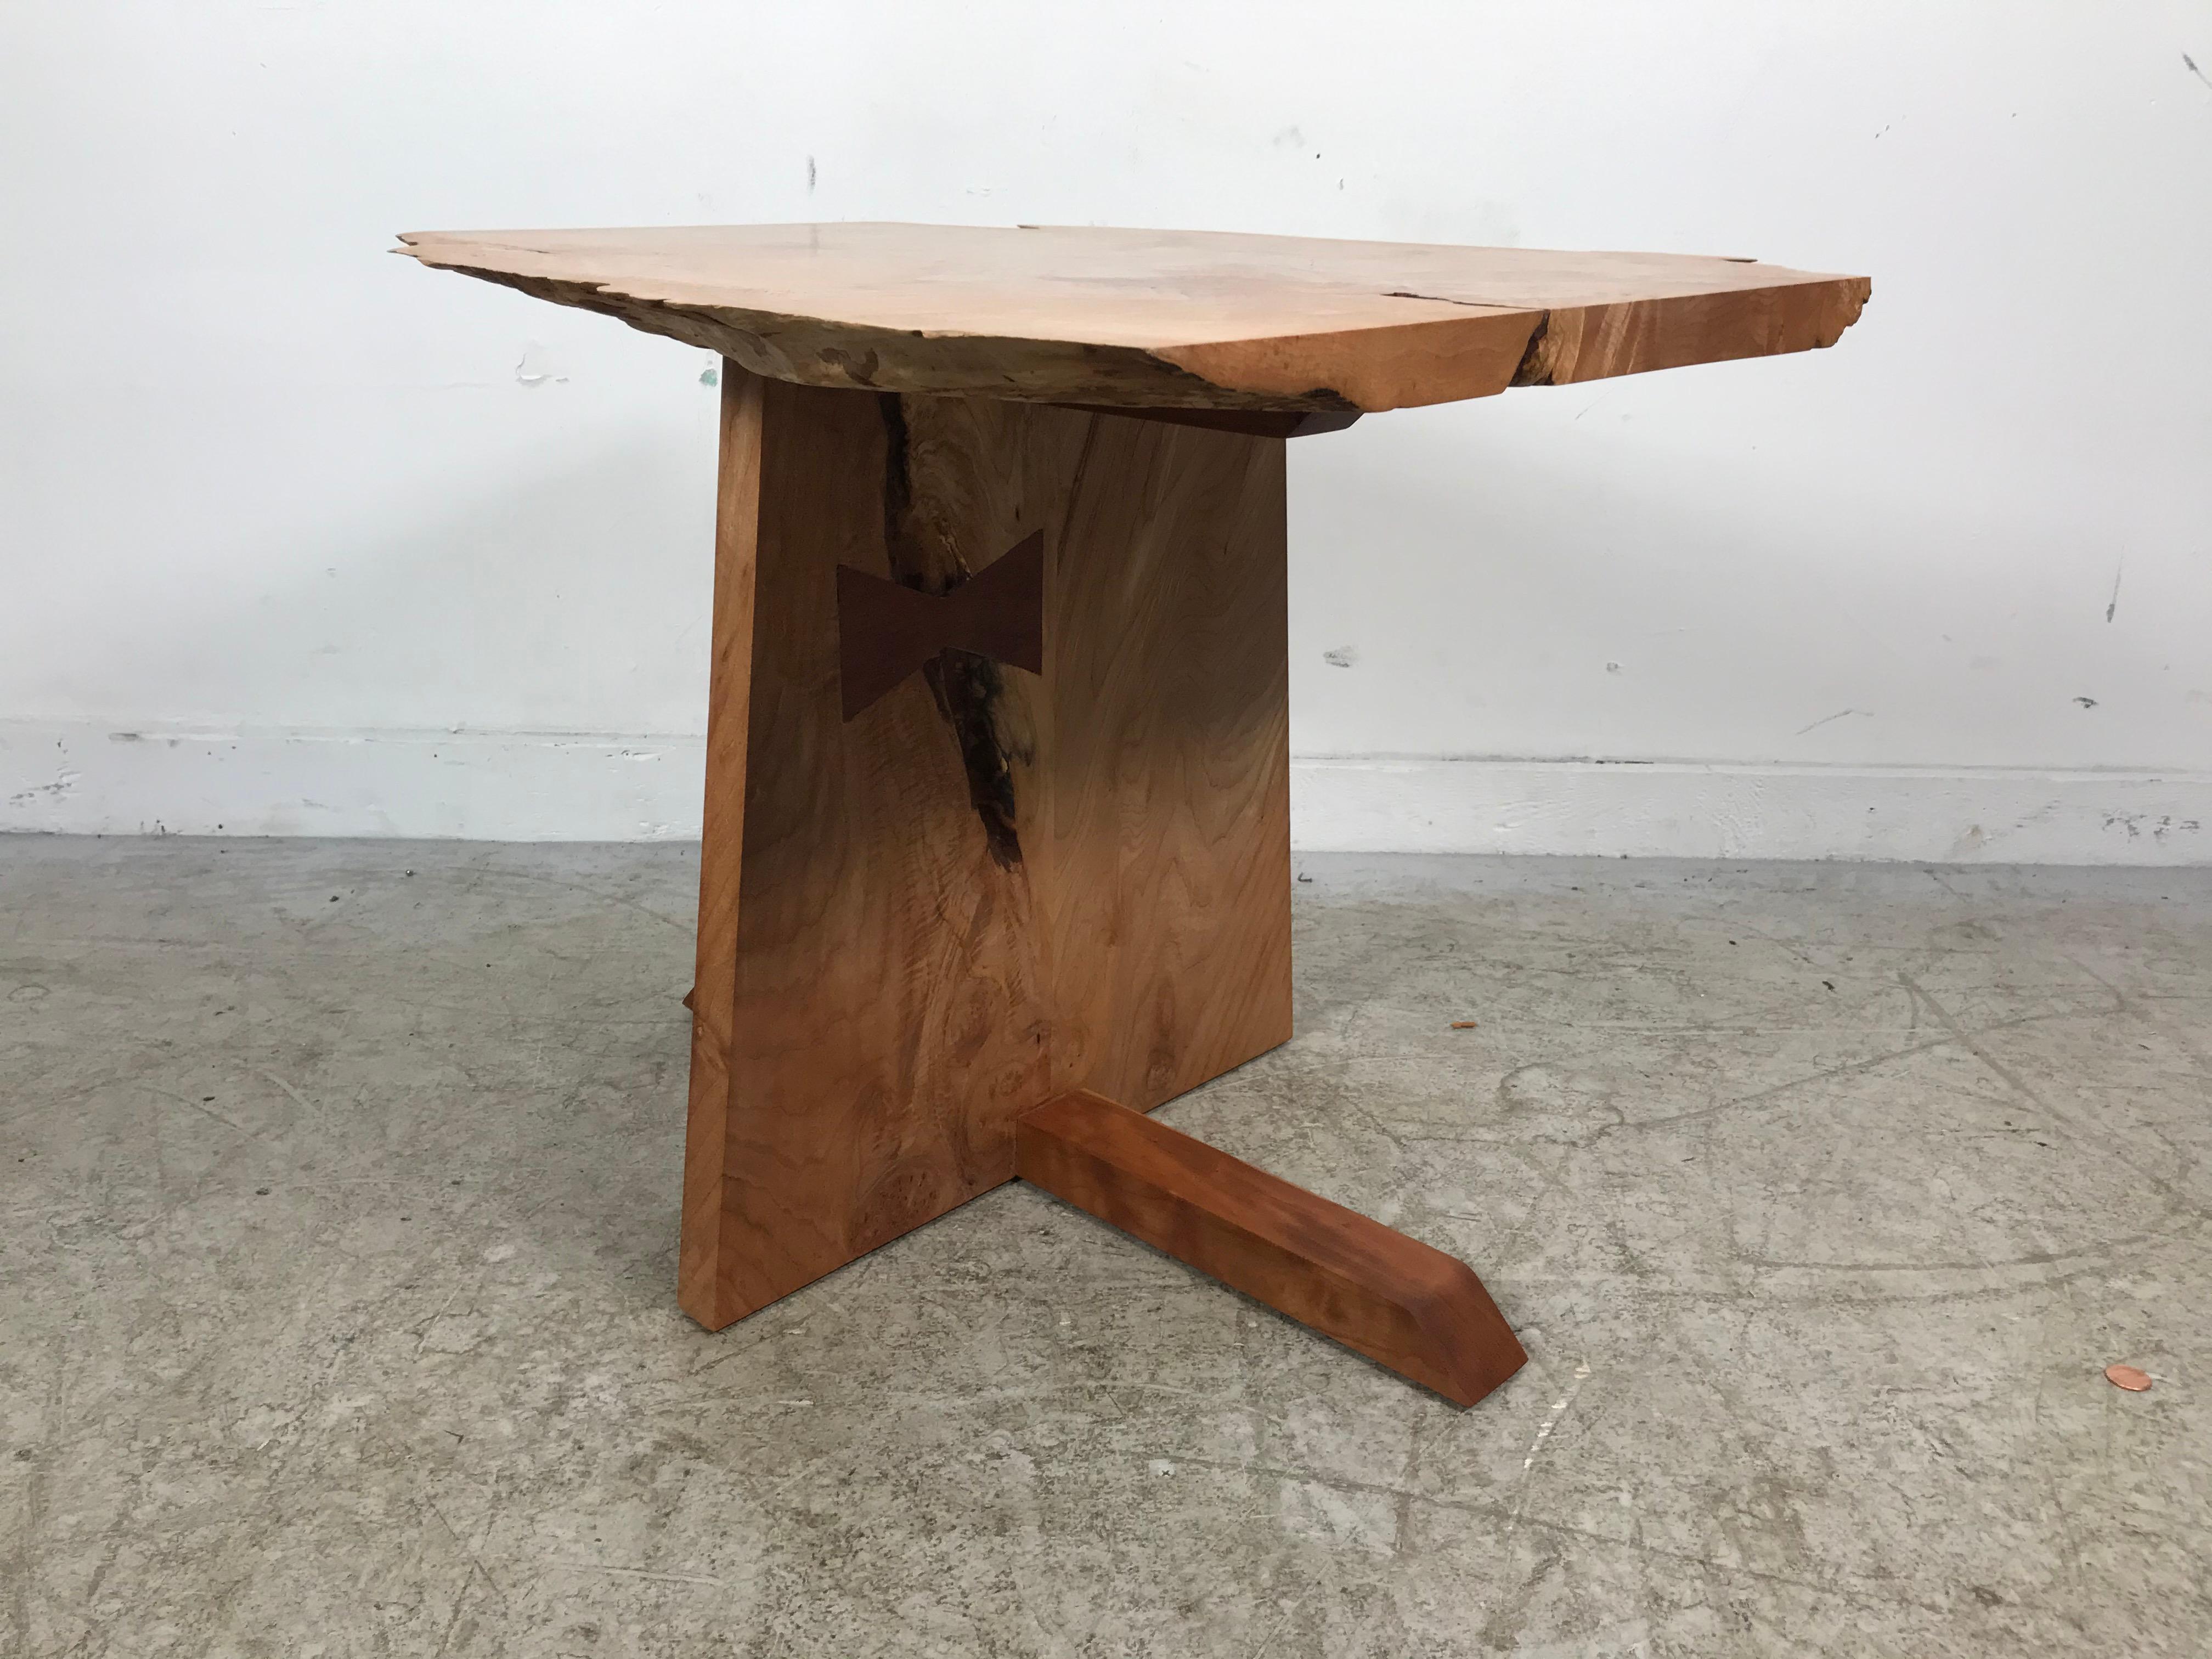 Hand-Crafted Modernist Free Edge Table in the Manner of George Nakashima by Alex Phillips